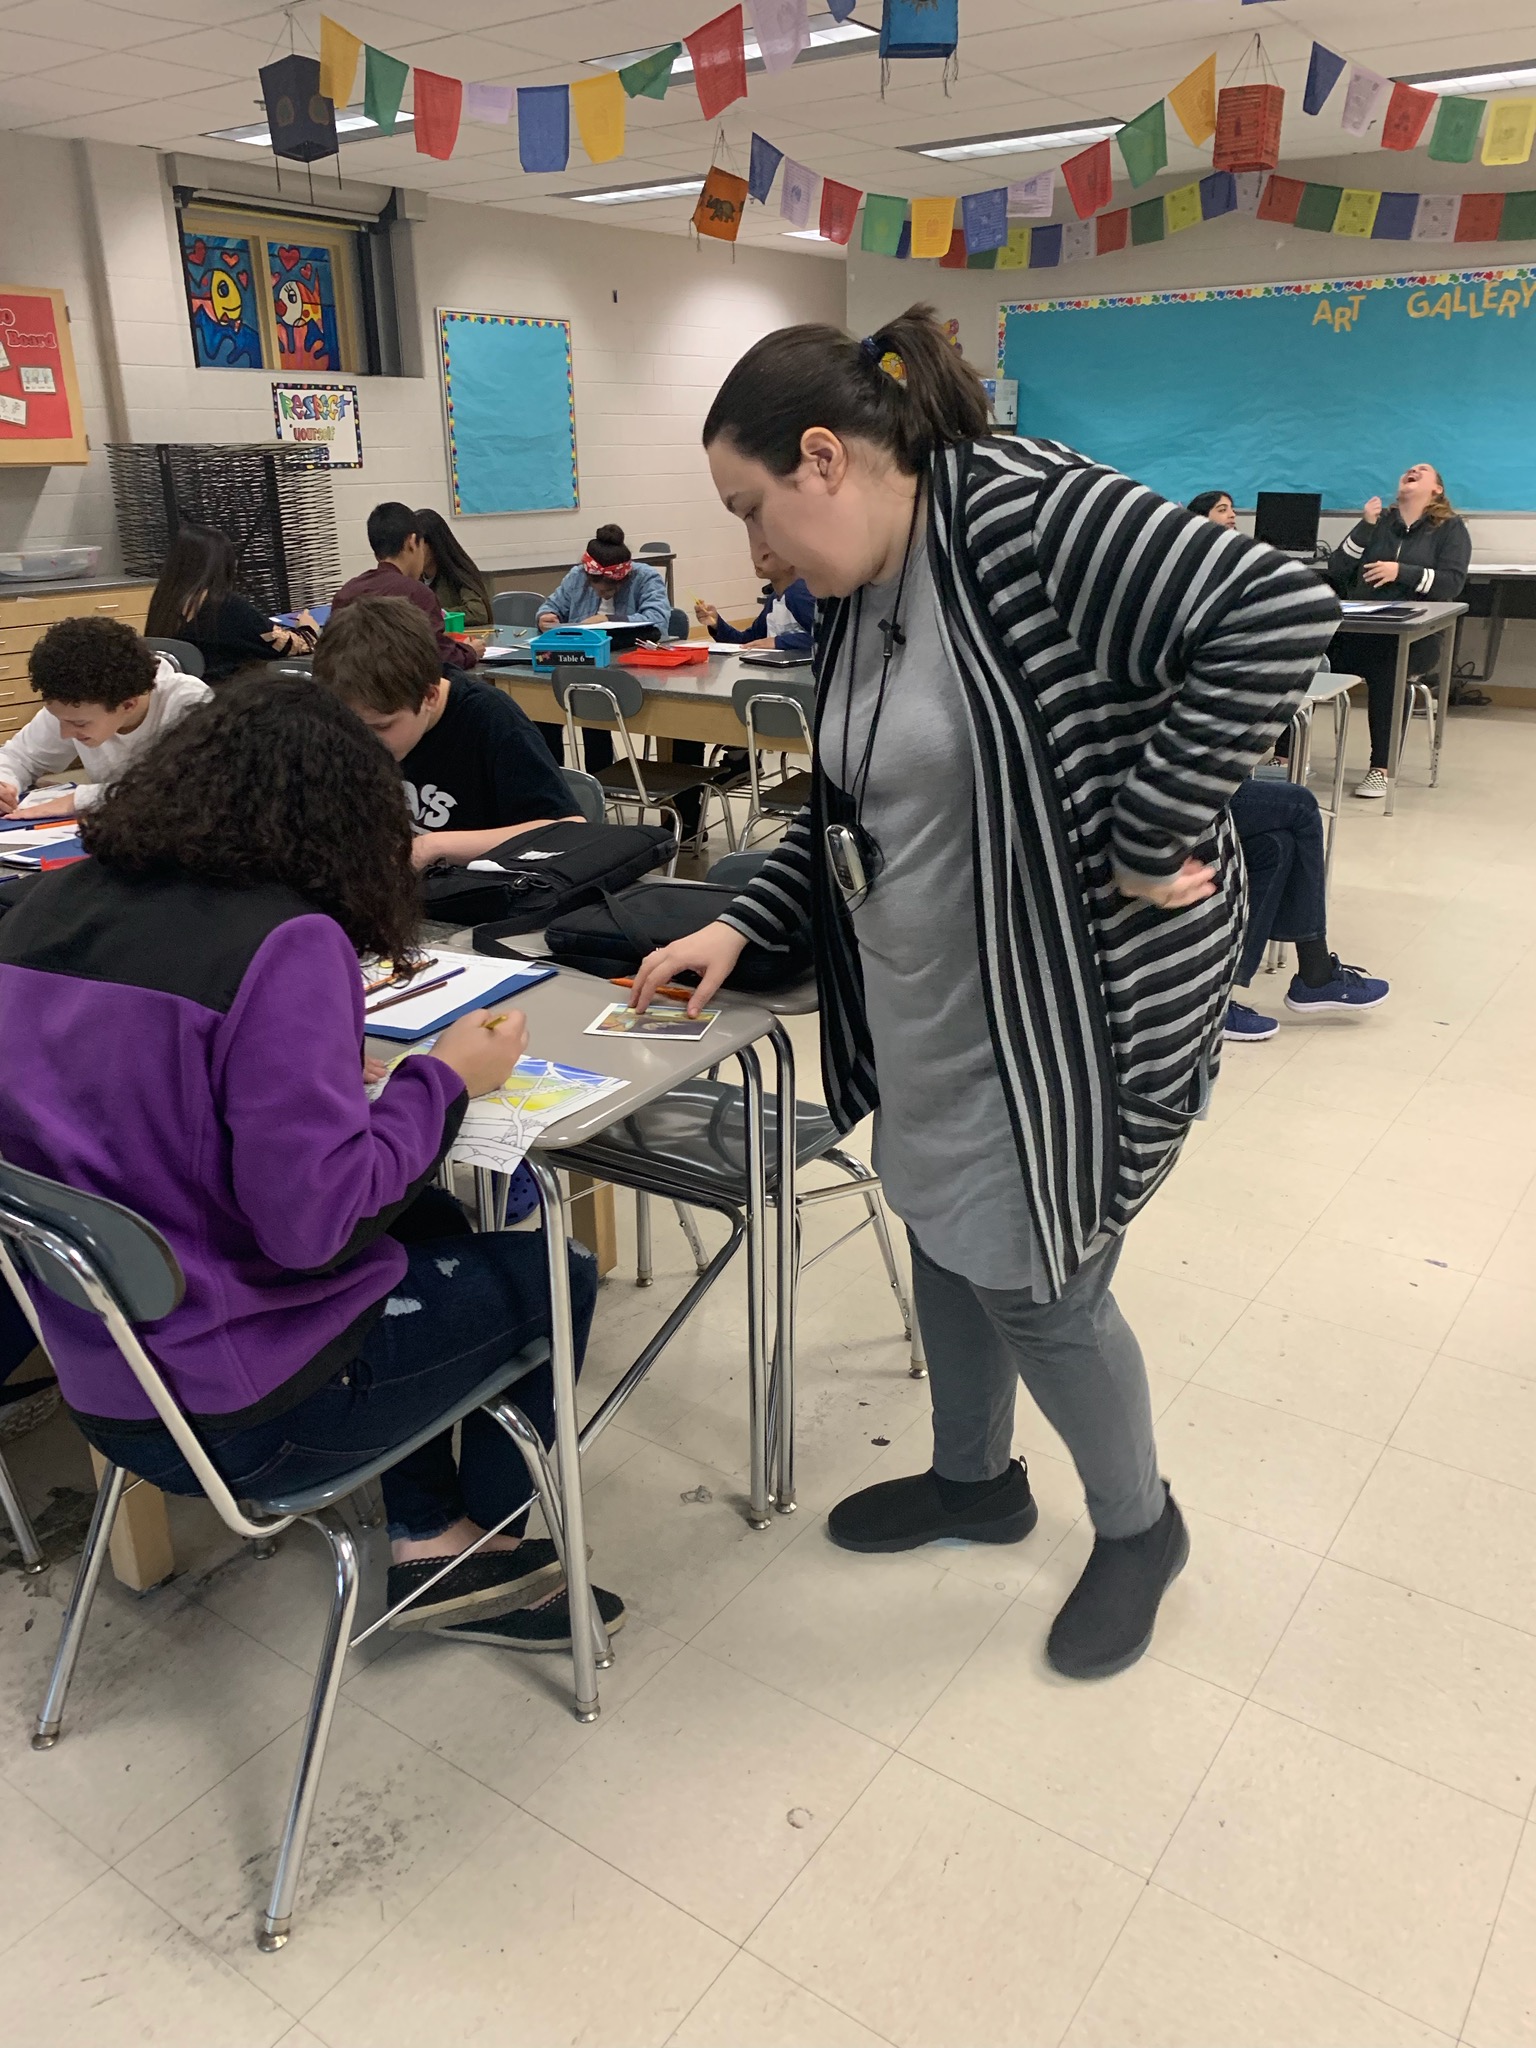 Ms. Pellegrino encourages all students and has high expectations of them and their work. She provides additional supports, modifications, adaptations, and differentiated instruction for learners of various needs.